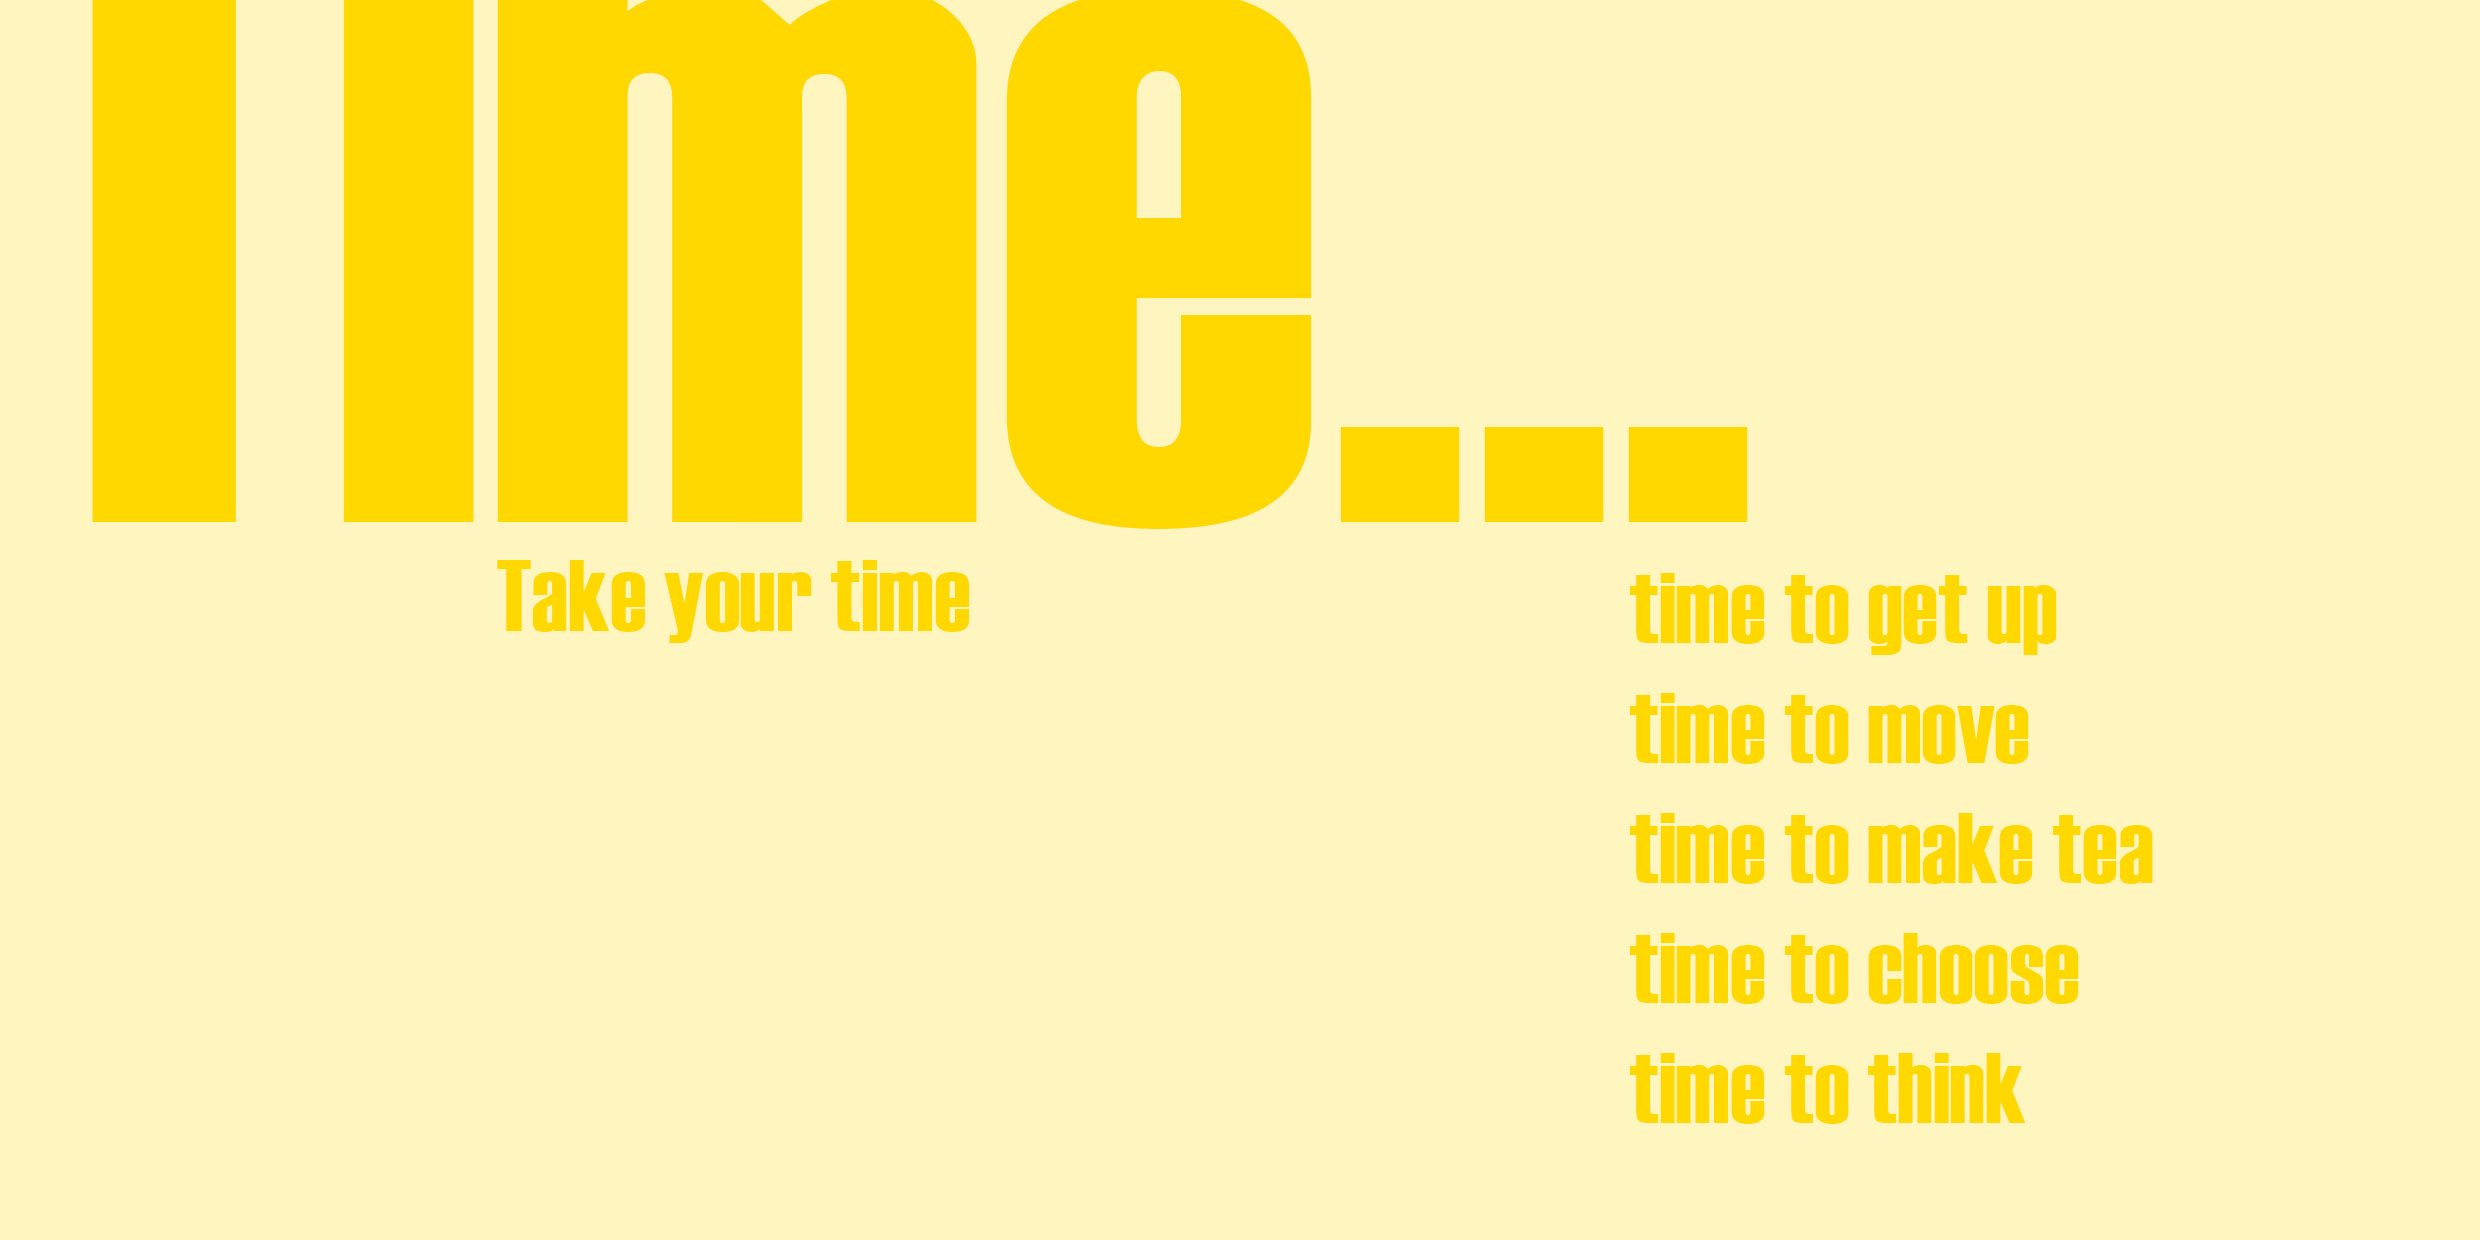 Graphic image with text in various sizes reading "Time... Take your time time to get up time to move time to make tea time to choose time to think time to be" on a yellow background.